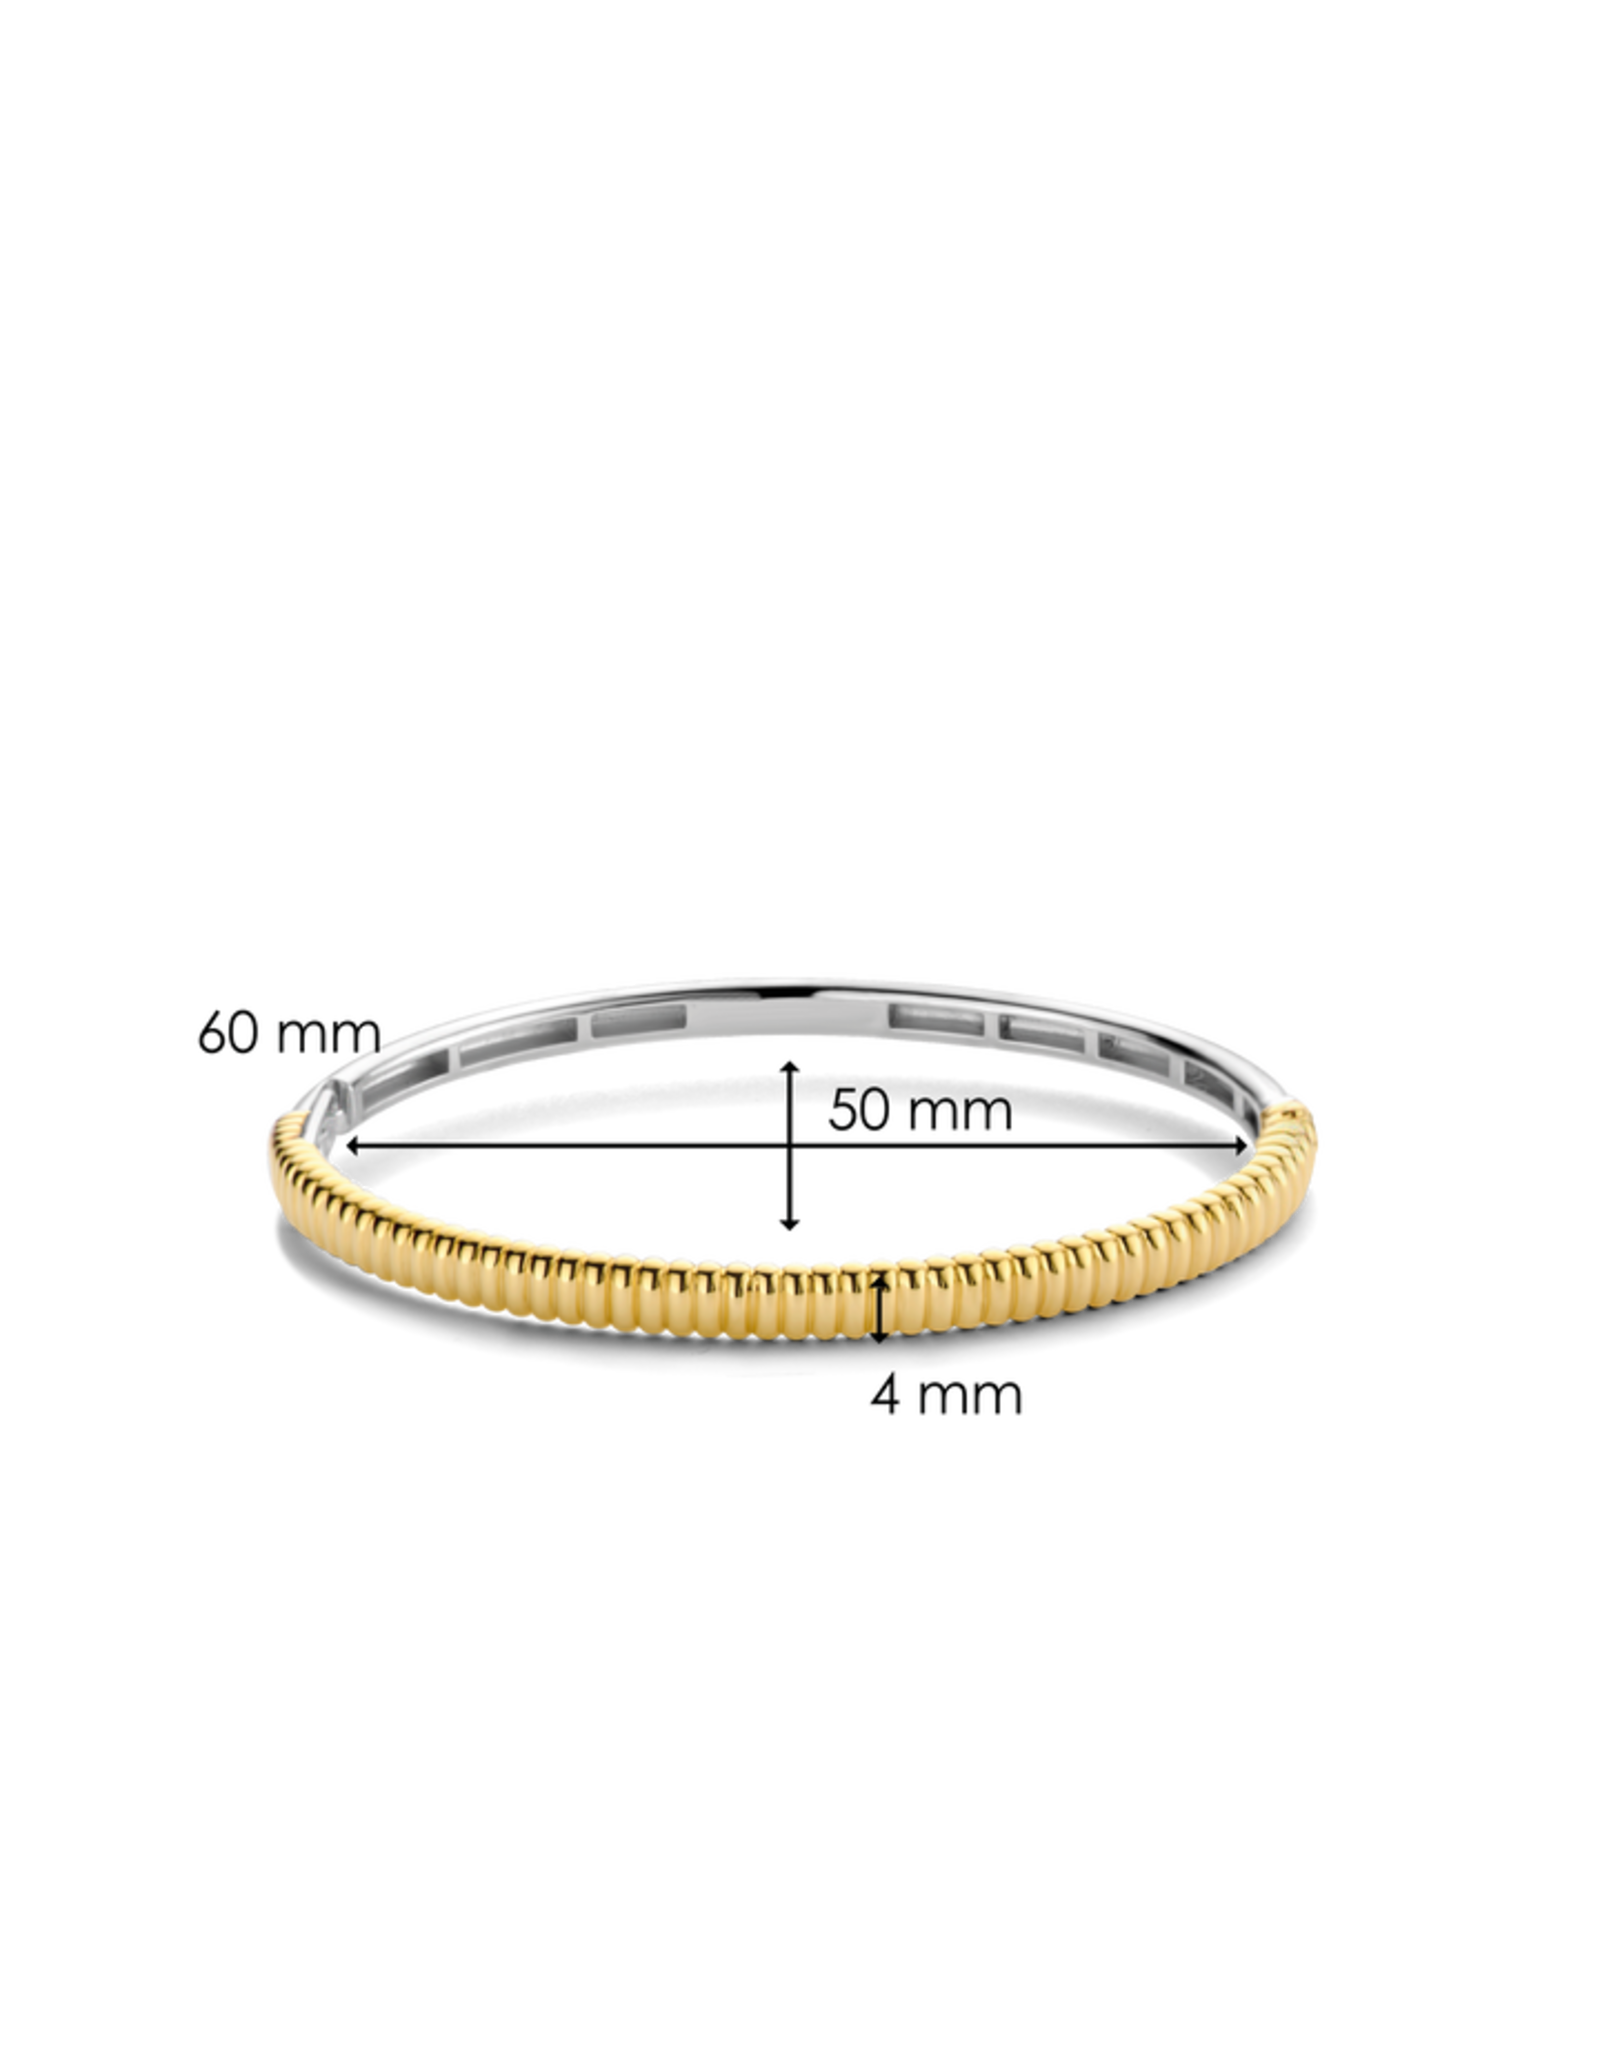 Yellow Gold-Plated Fluted Bangle